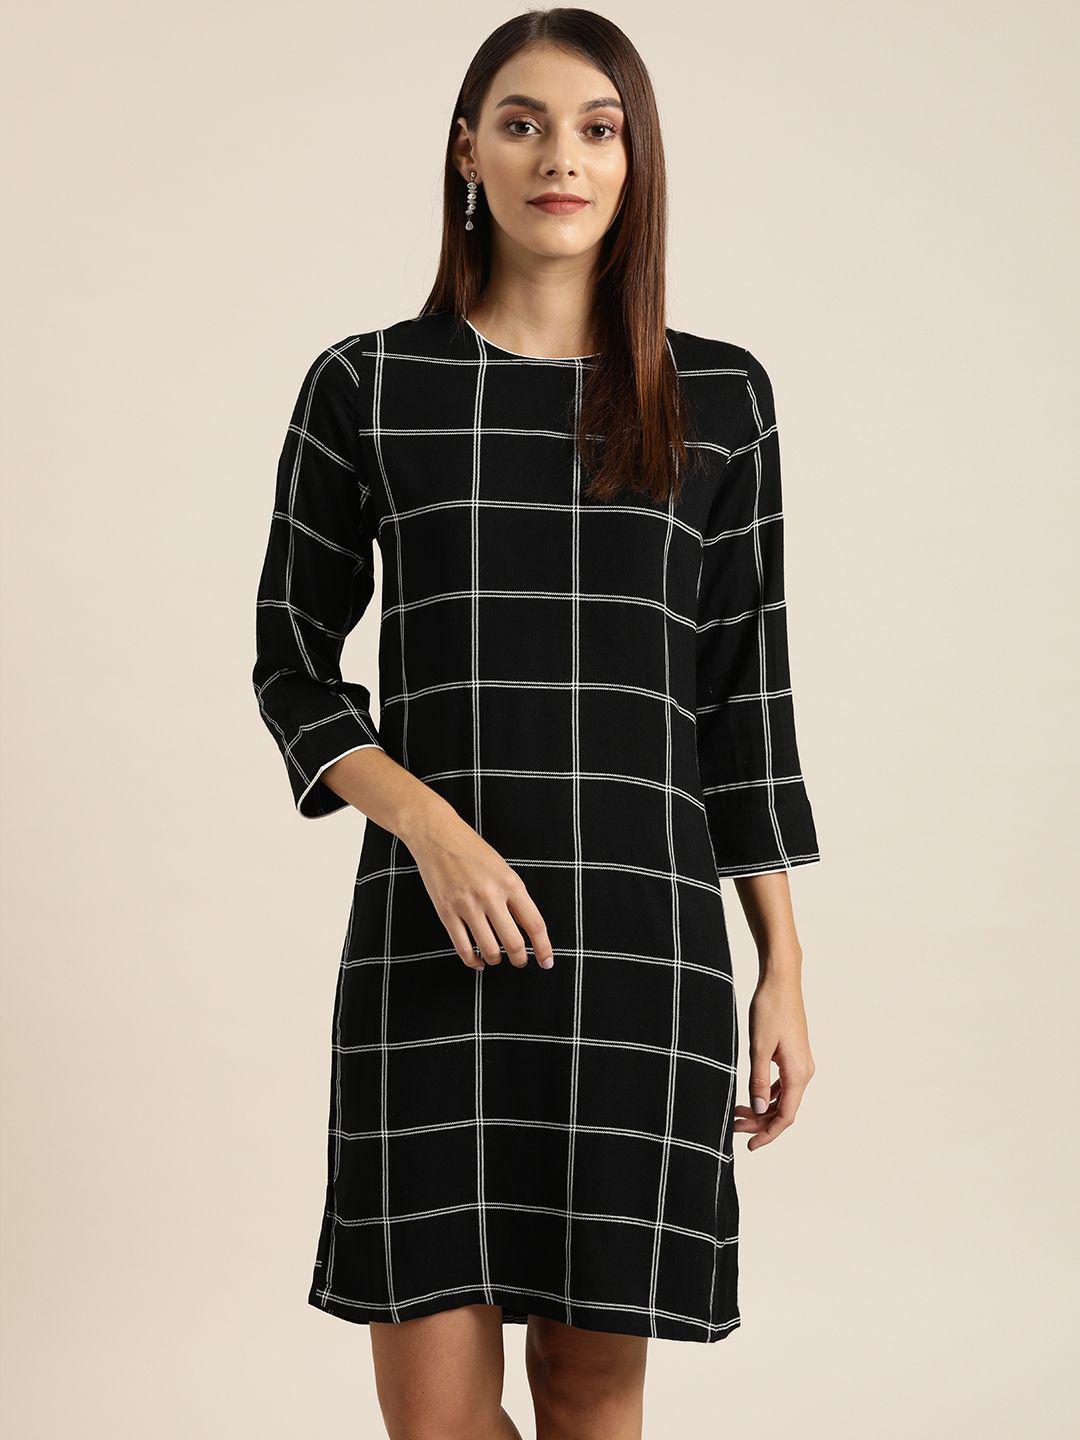 her by invictus women black & white checked a-line dress